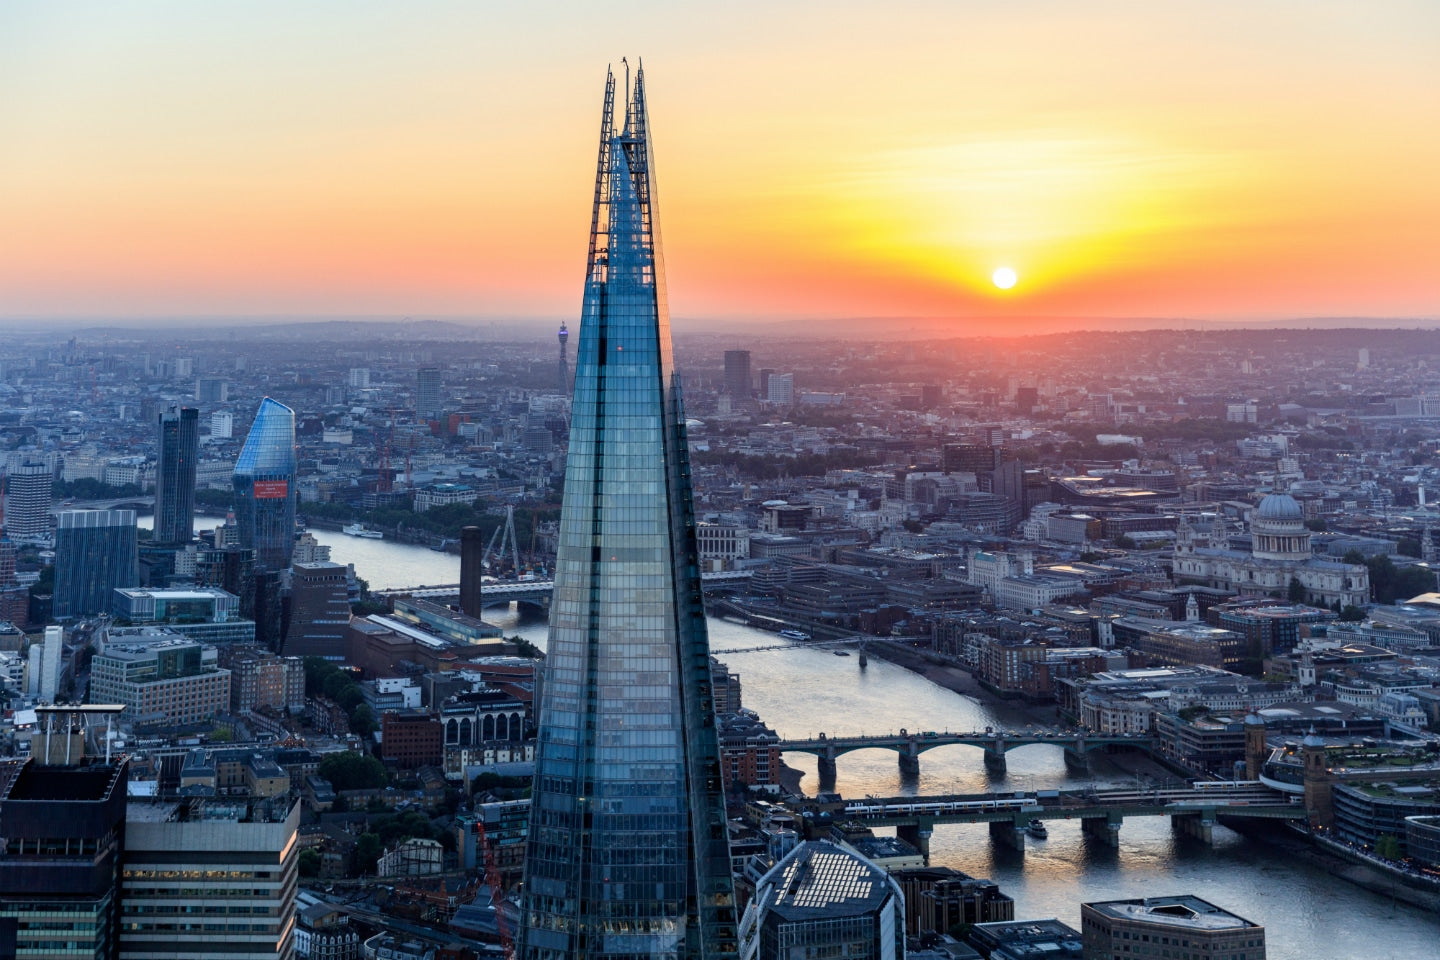 1nt: 3* London stay, breakfast & View from The Shard with Champagne: £248 for two